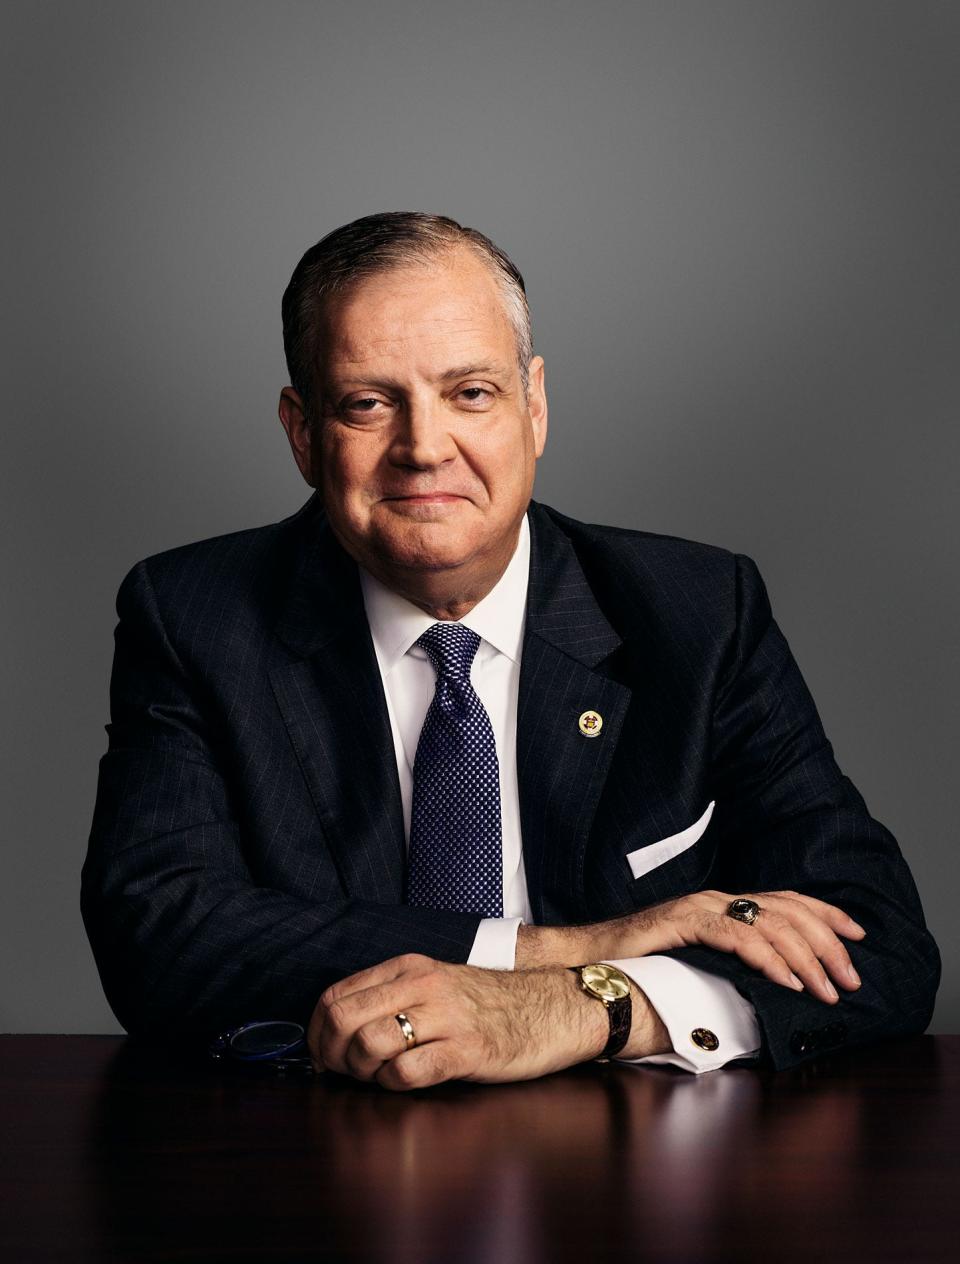 R. Albert Mohler Jr. is president of The Southern Baptist Theological Seminary.